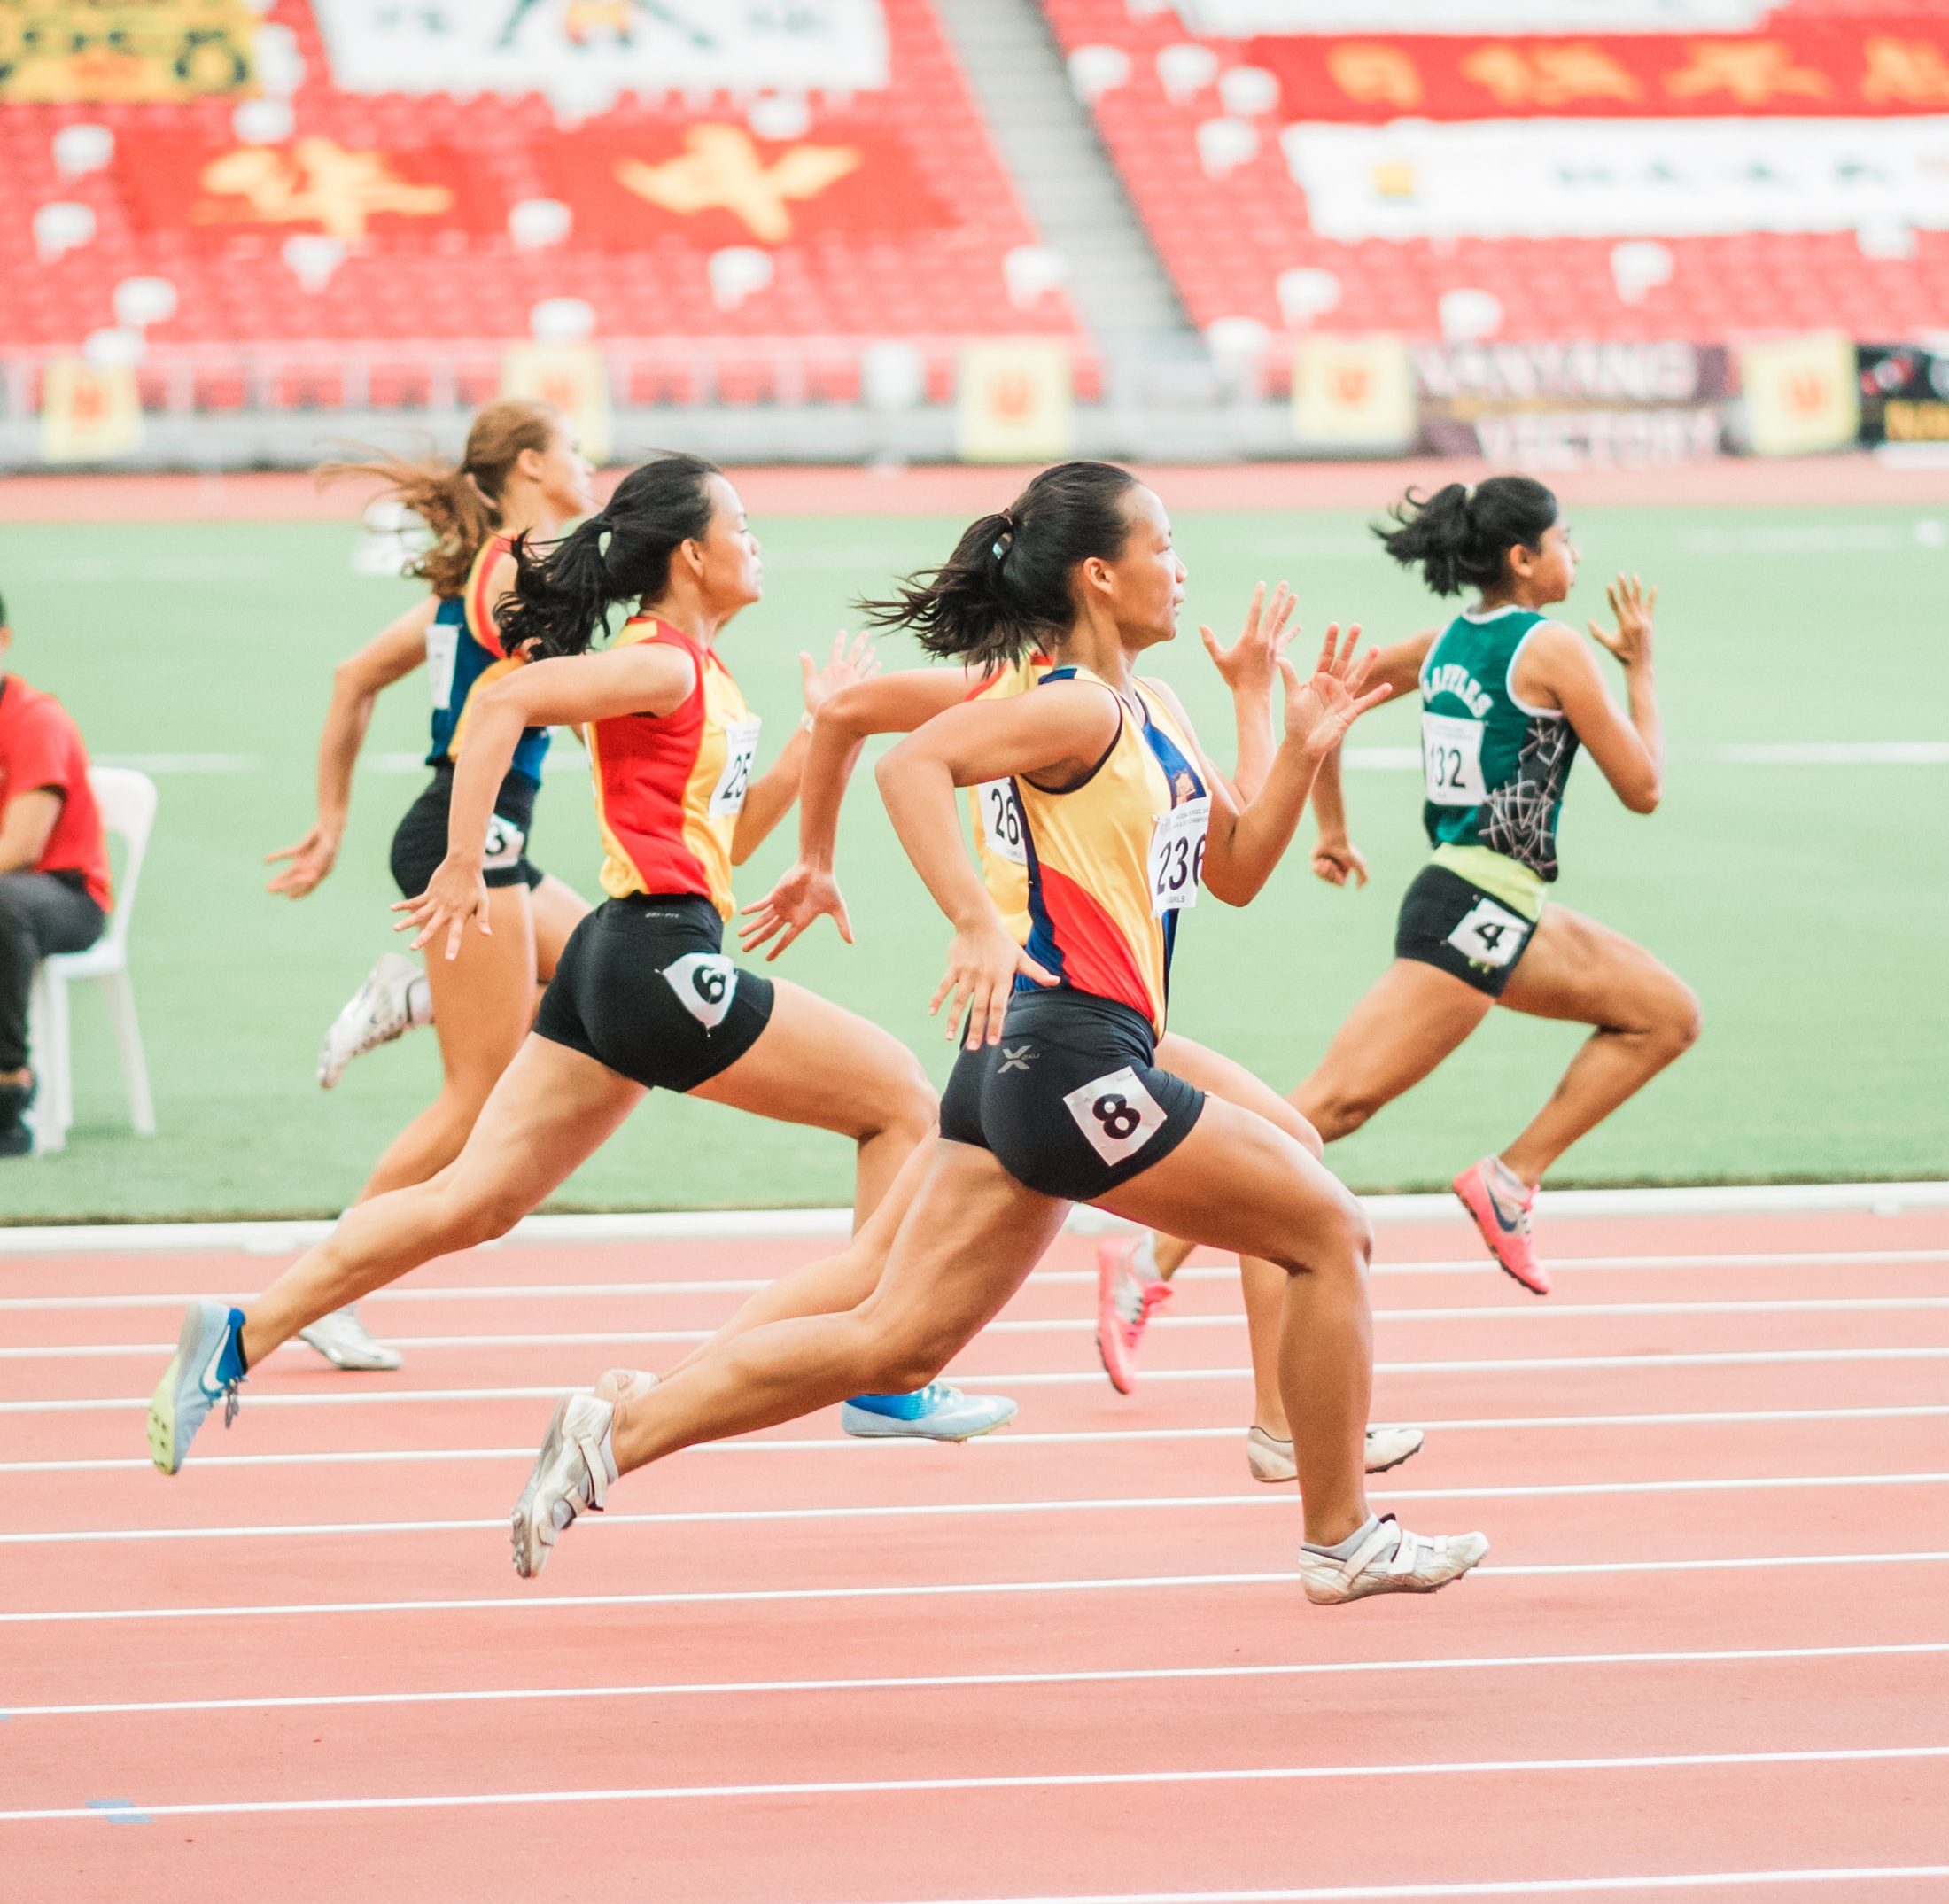 Image shows a photo of women in a short distance running race on a track.